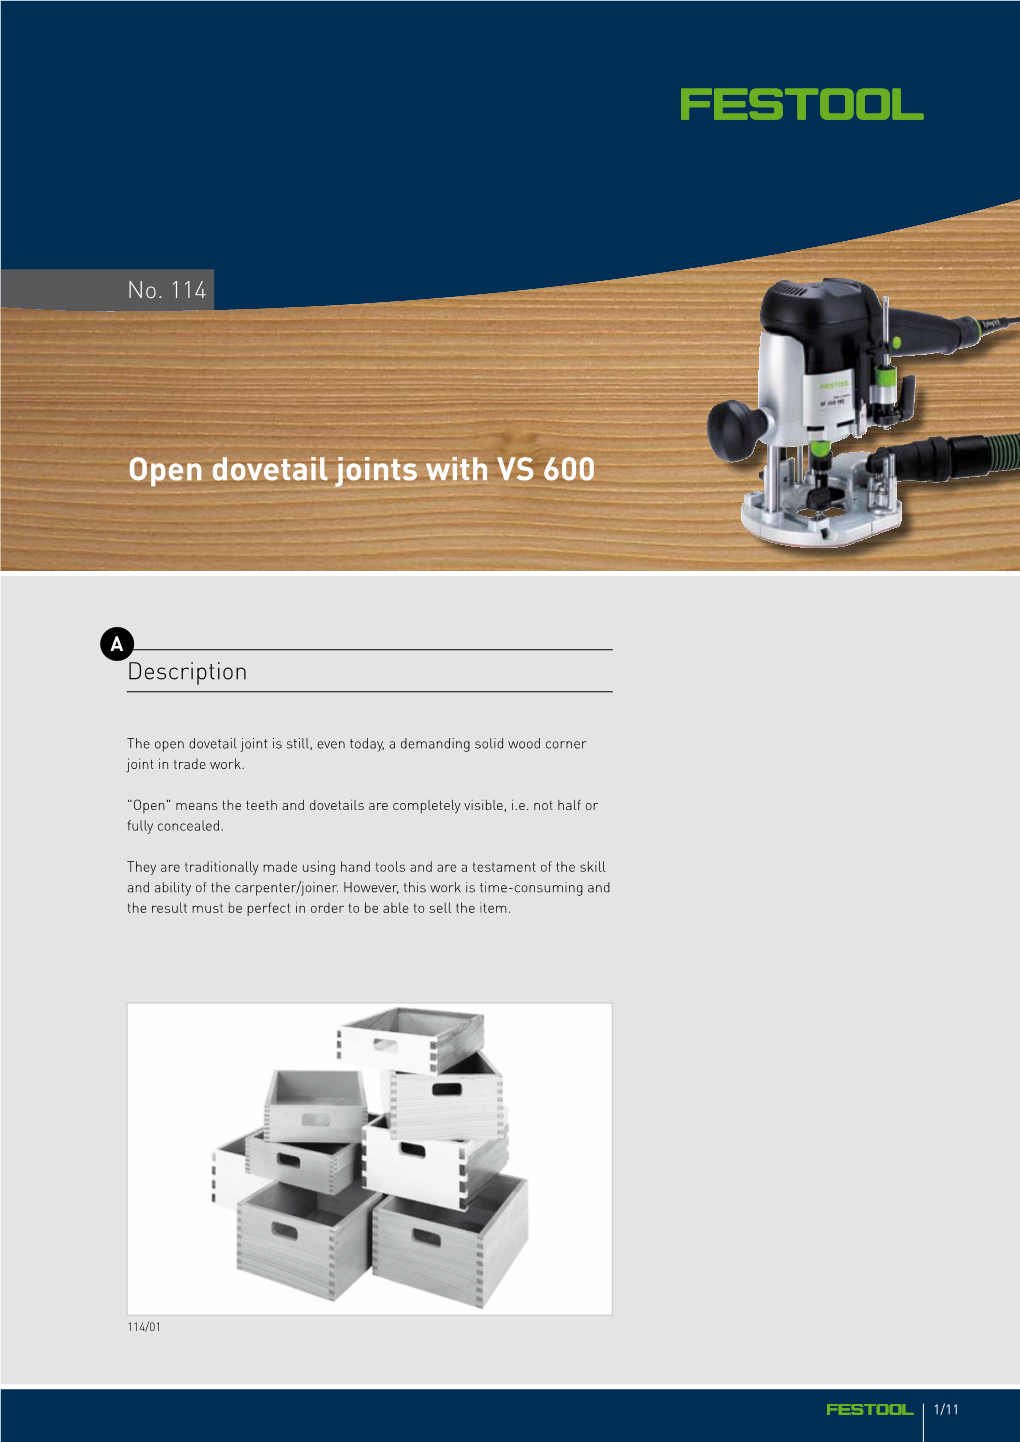 Open Dovetail Joints with VS 600